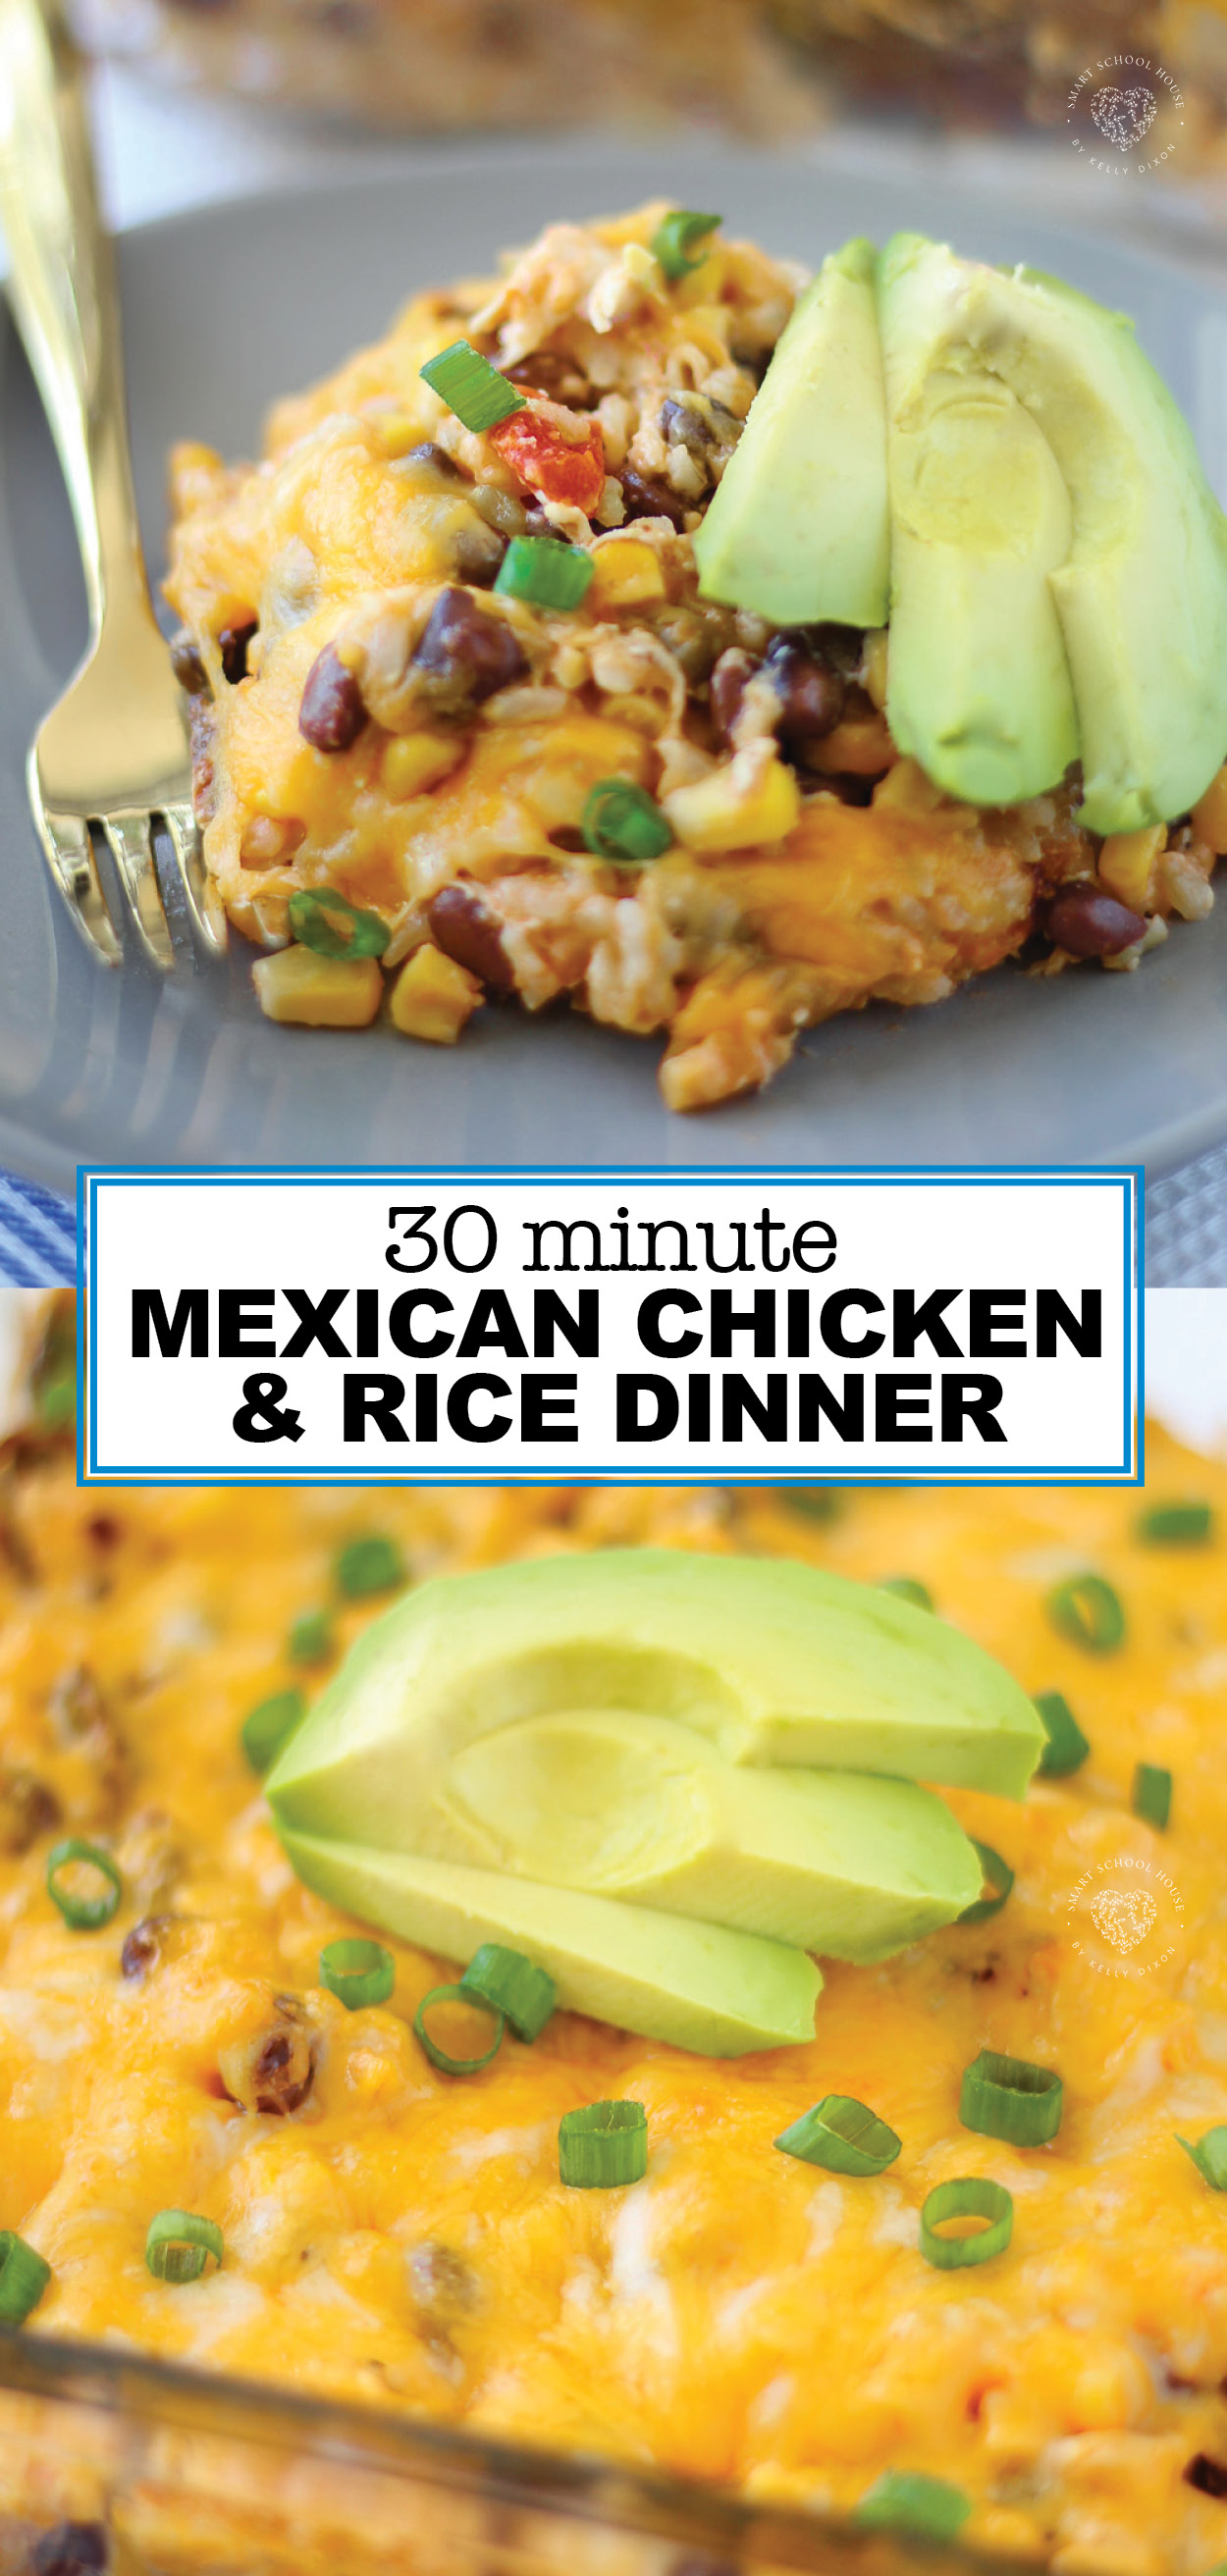 Mexican Chicken and Rice Dinner Recipe – an easy and delicious meal! This dinner recipe is made in one baking dish and is done just in 30 minutes making clean up a breeze. Perfect for busy week nights! 